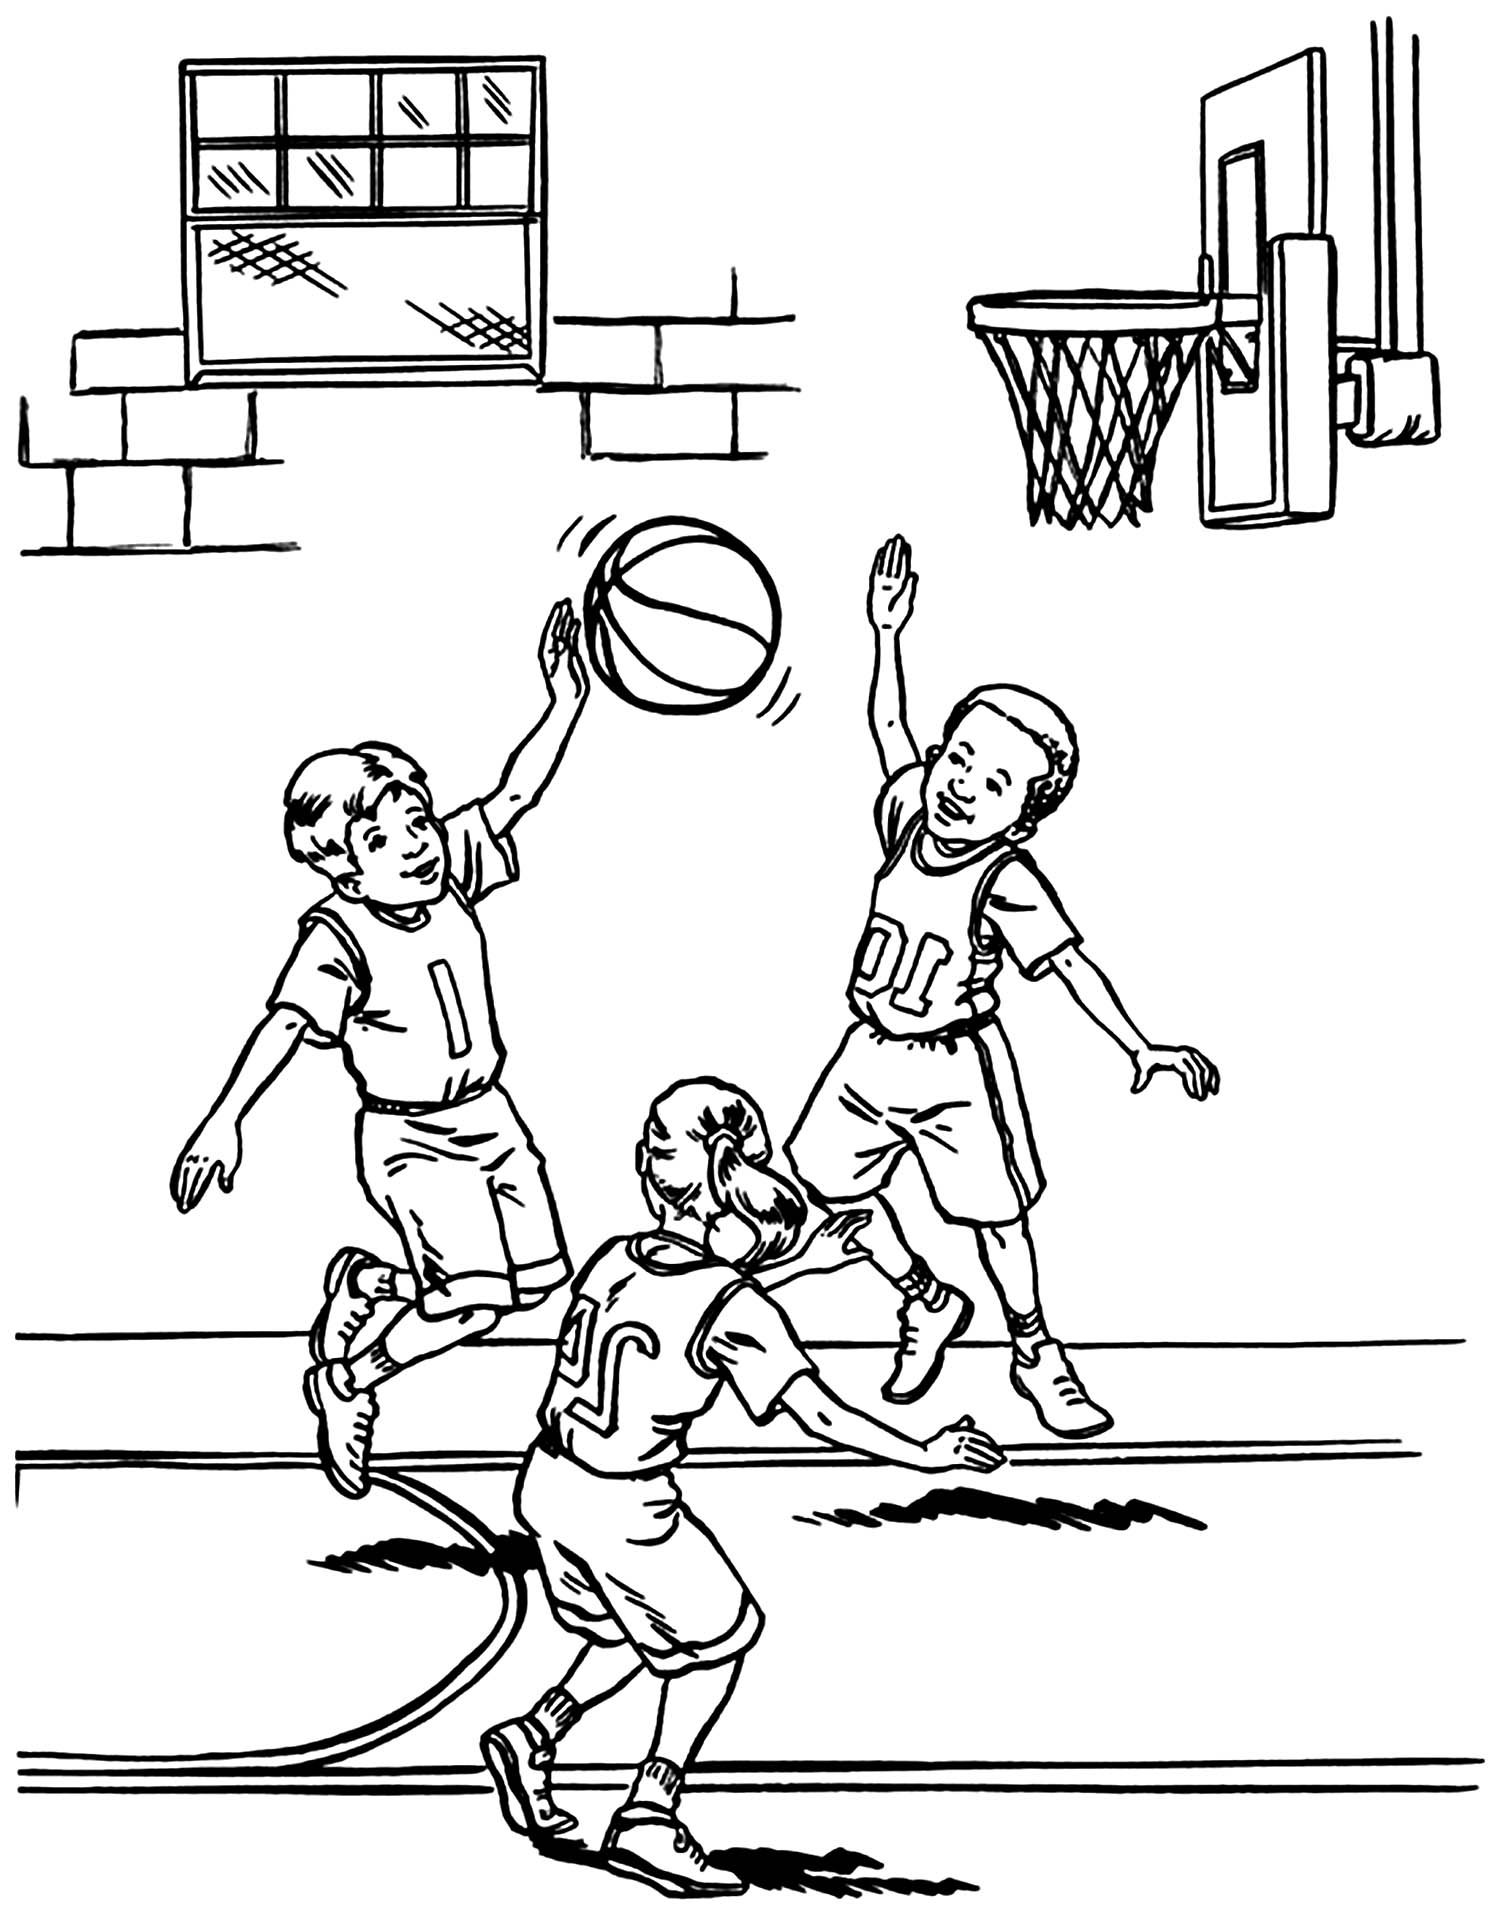 Simple basketball coloring pages for kids